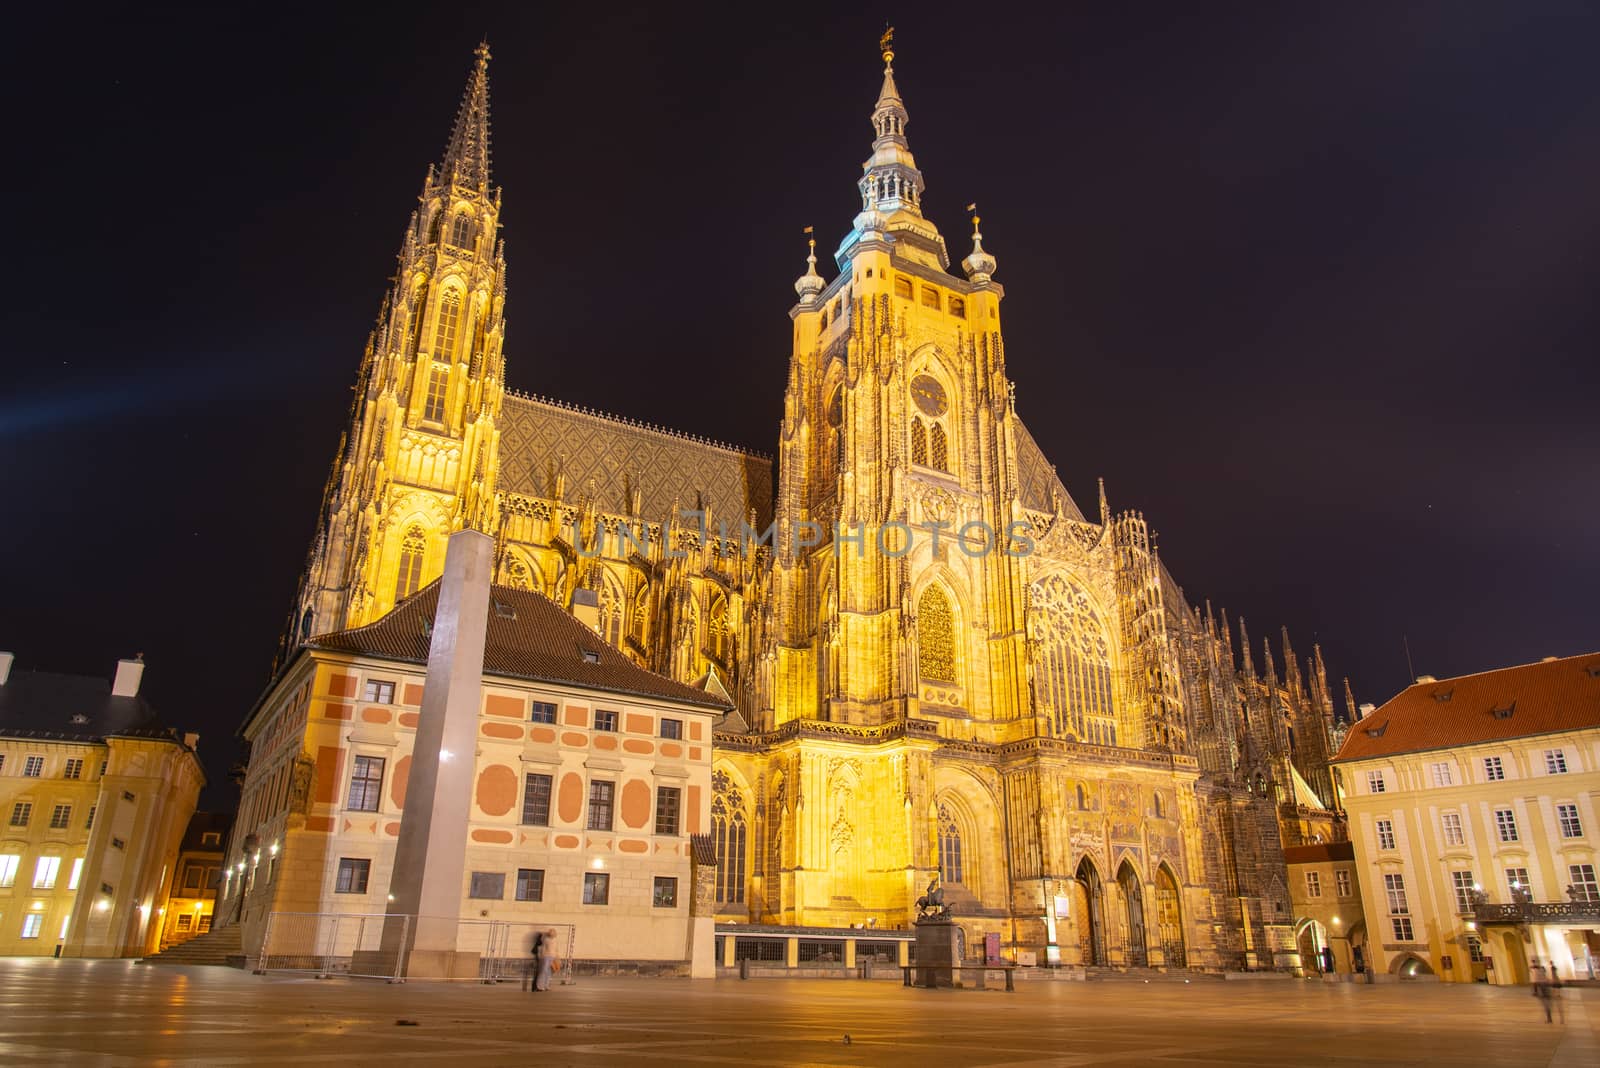 St Vitus Cathedral in Prague Castle by night, Prague, Czech Republic by pyty